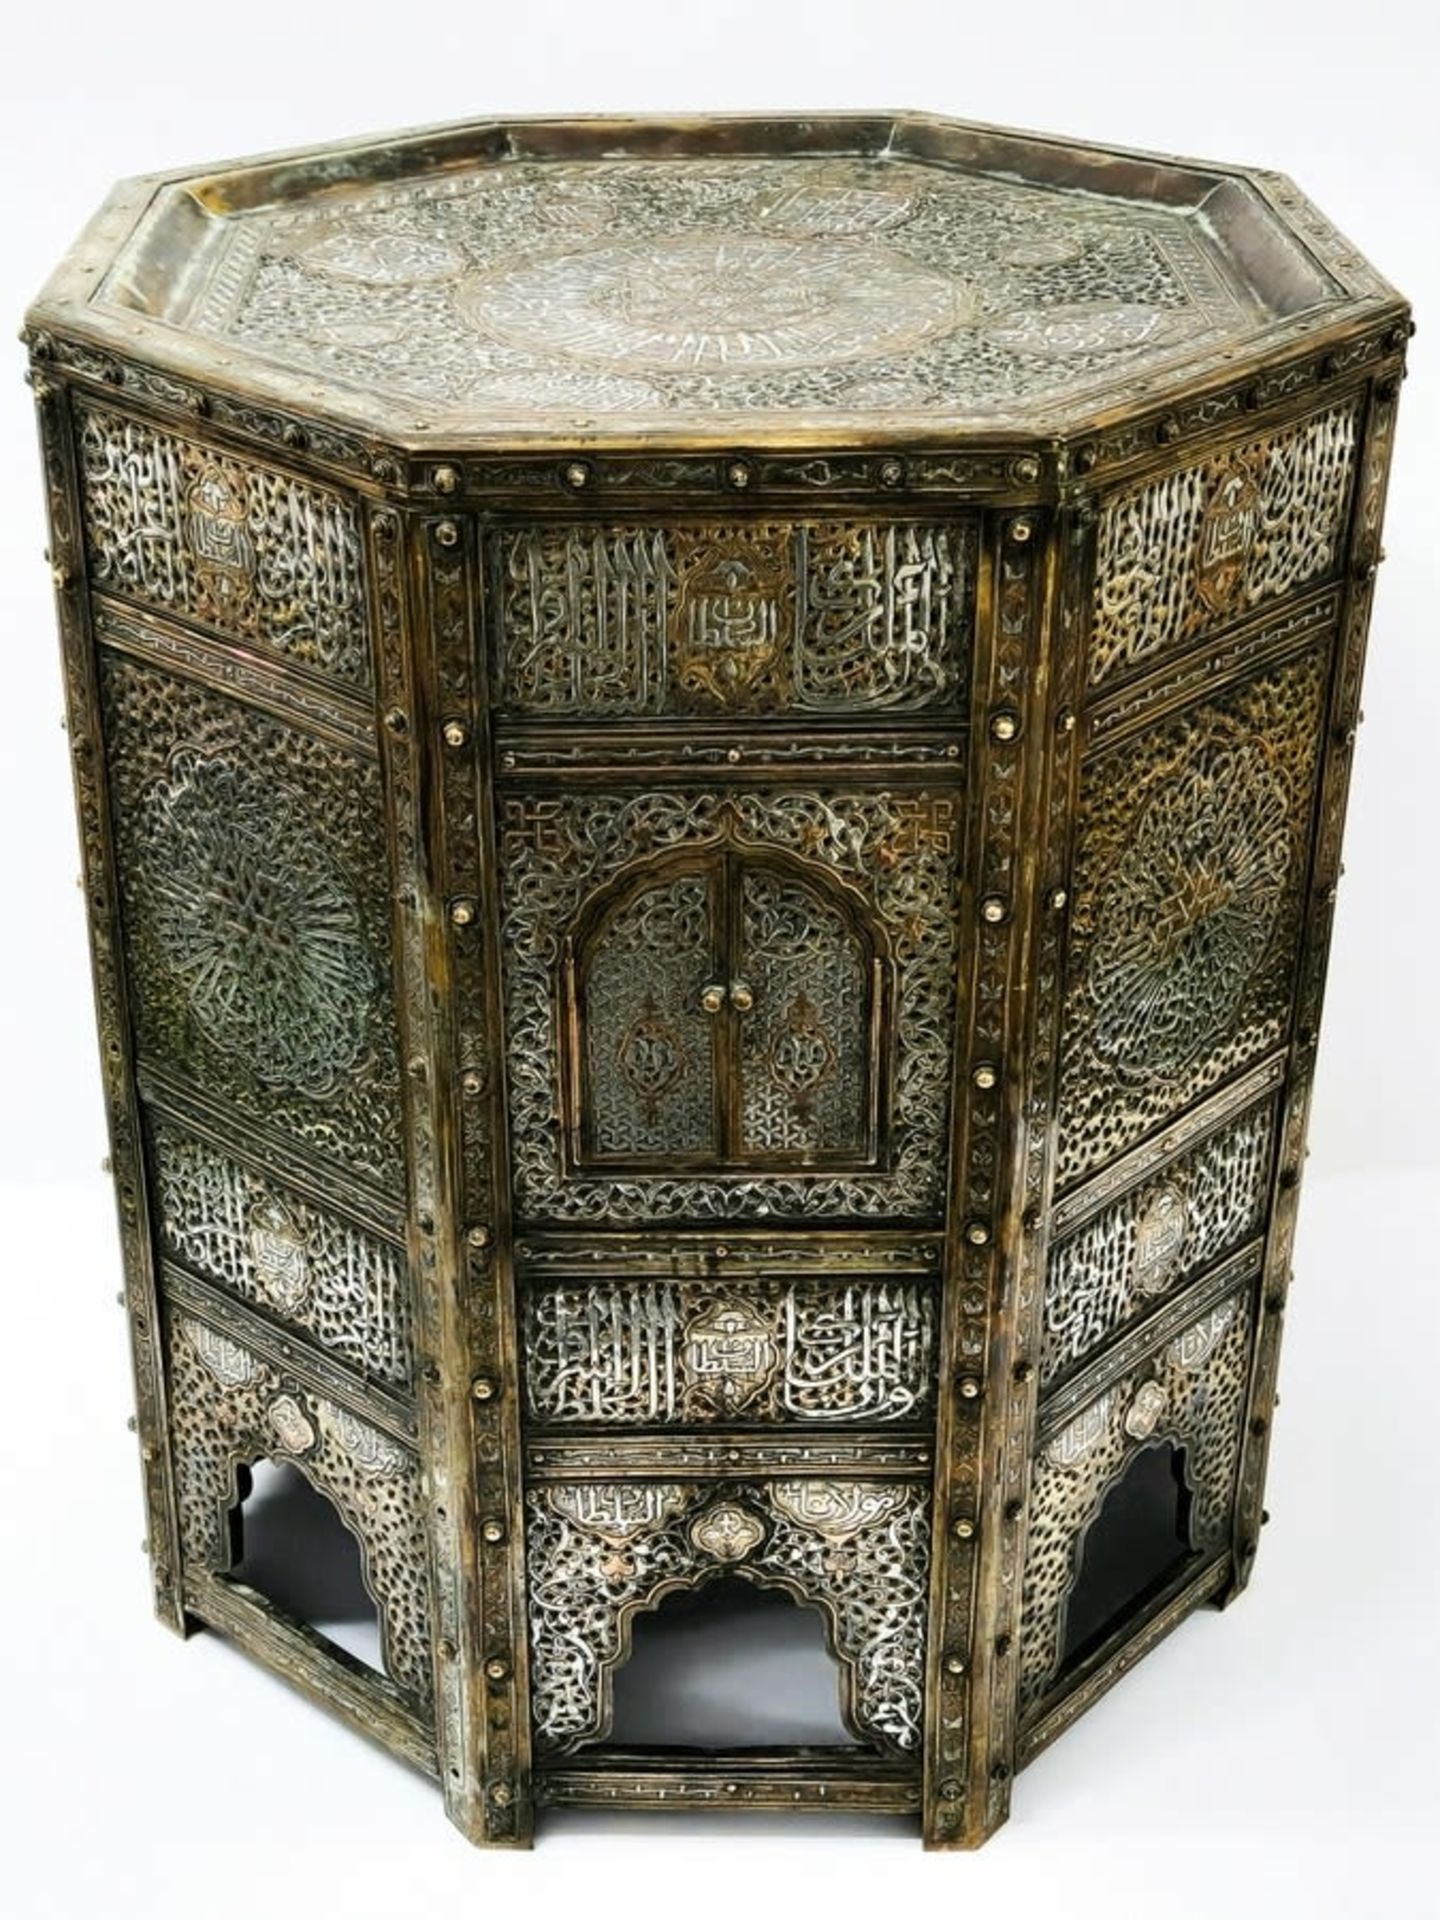 Islamic decorative table, an impressive and high-quality table for Quran, in the Mamluk Revival - Bild 2 aus 3